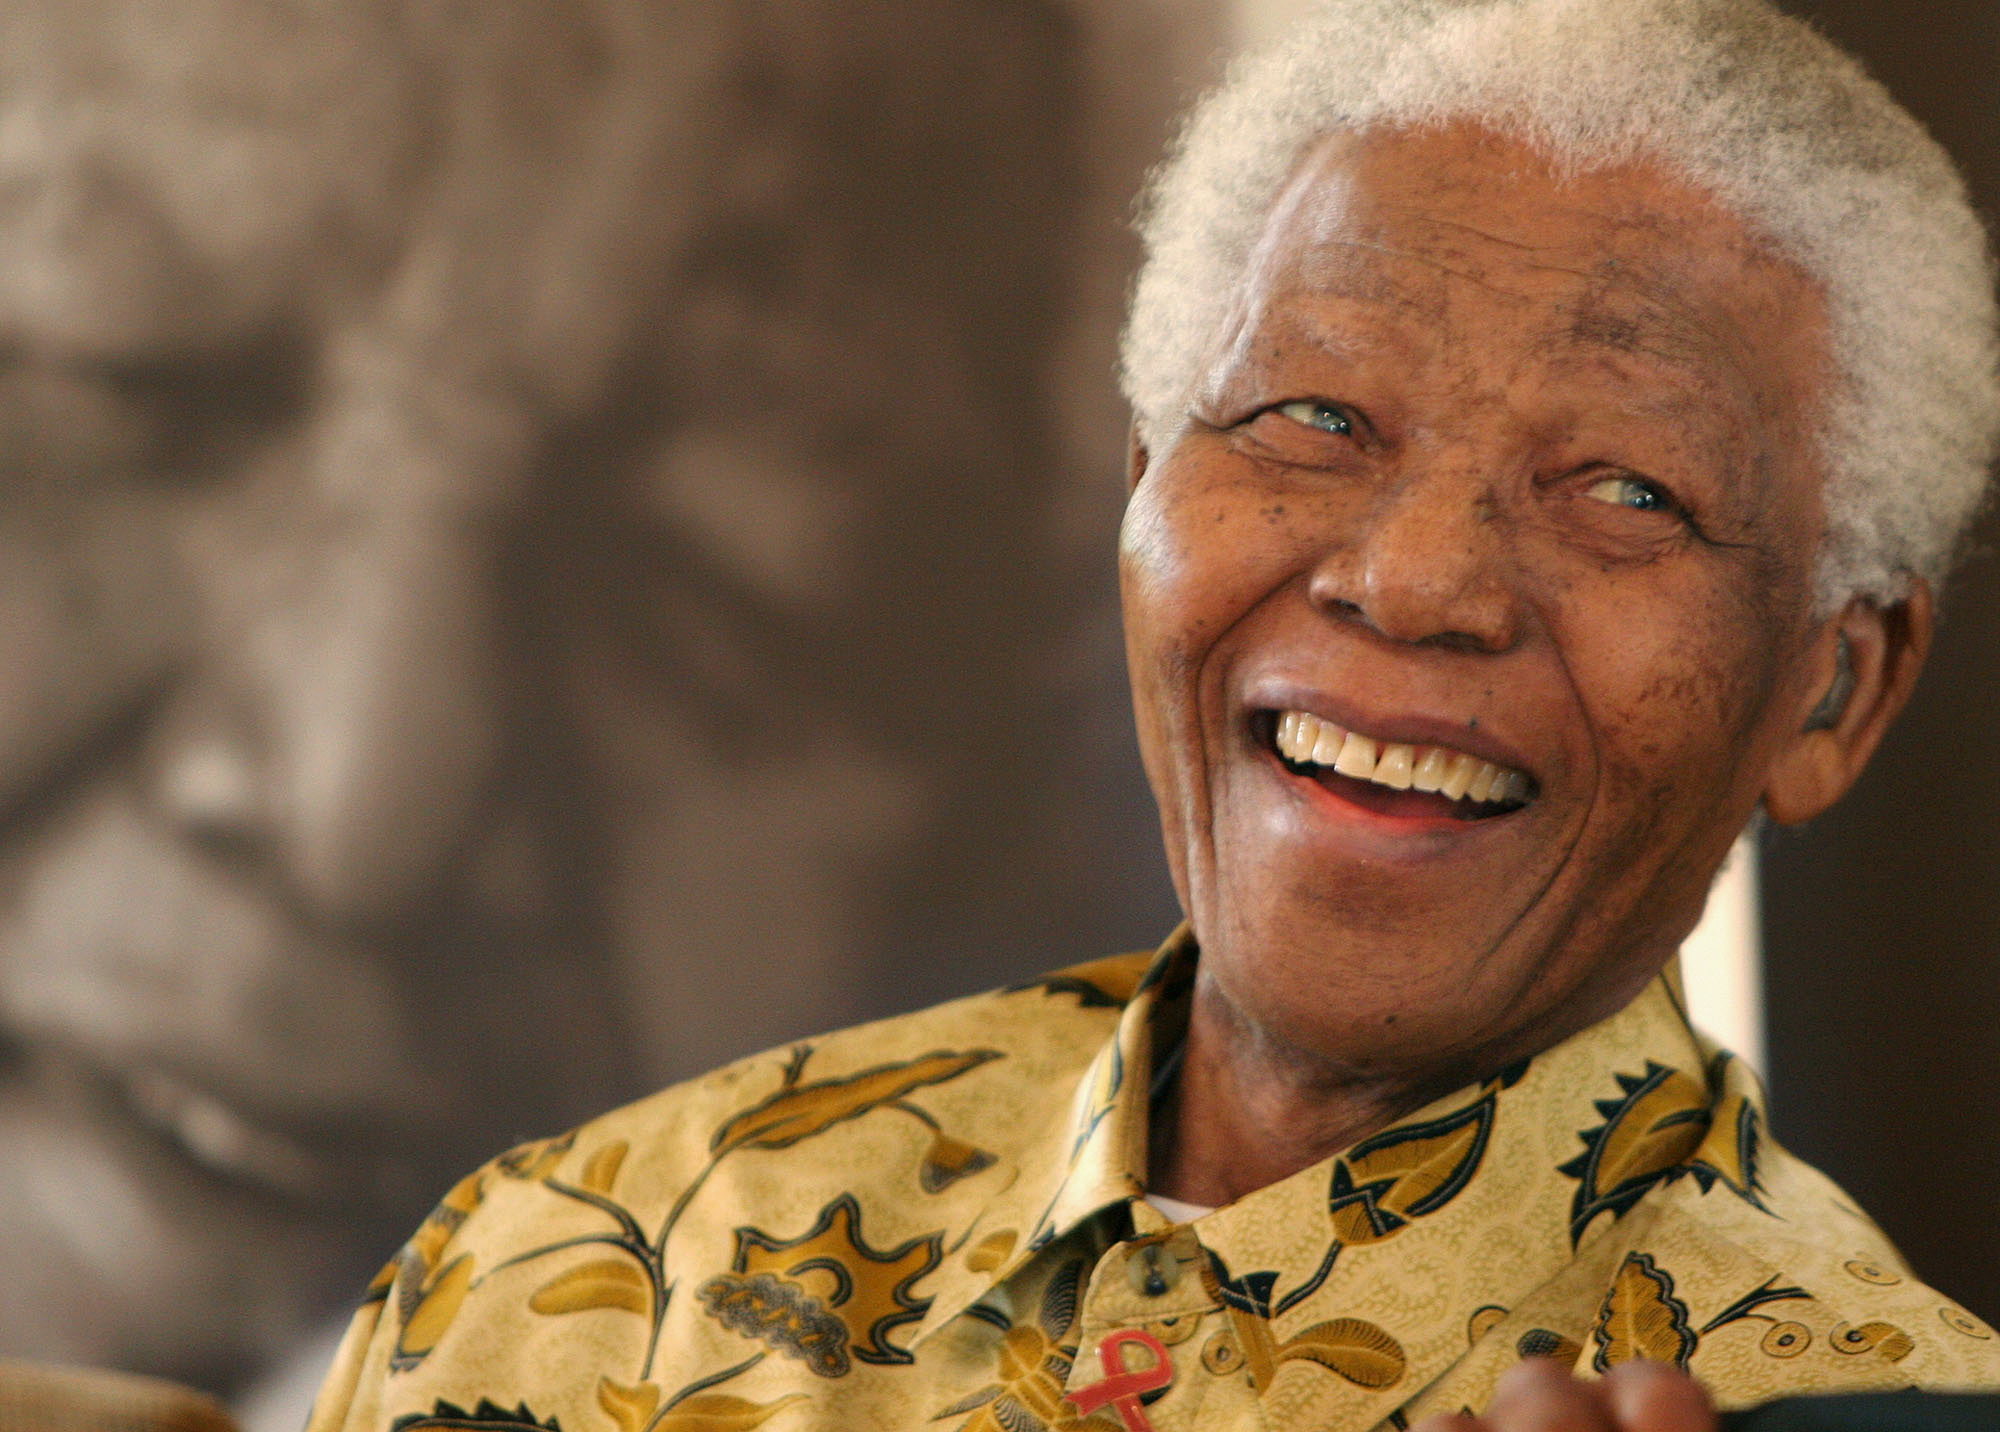 Best tribute to Mandela are actions that improve world - UN Chief